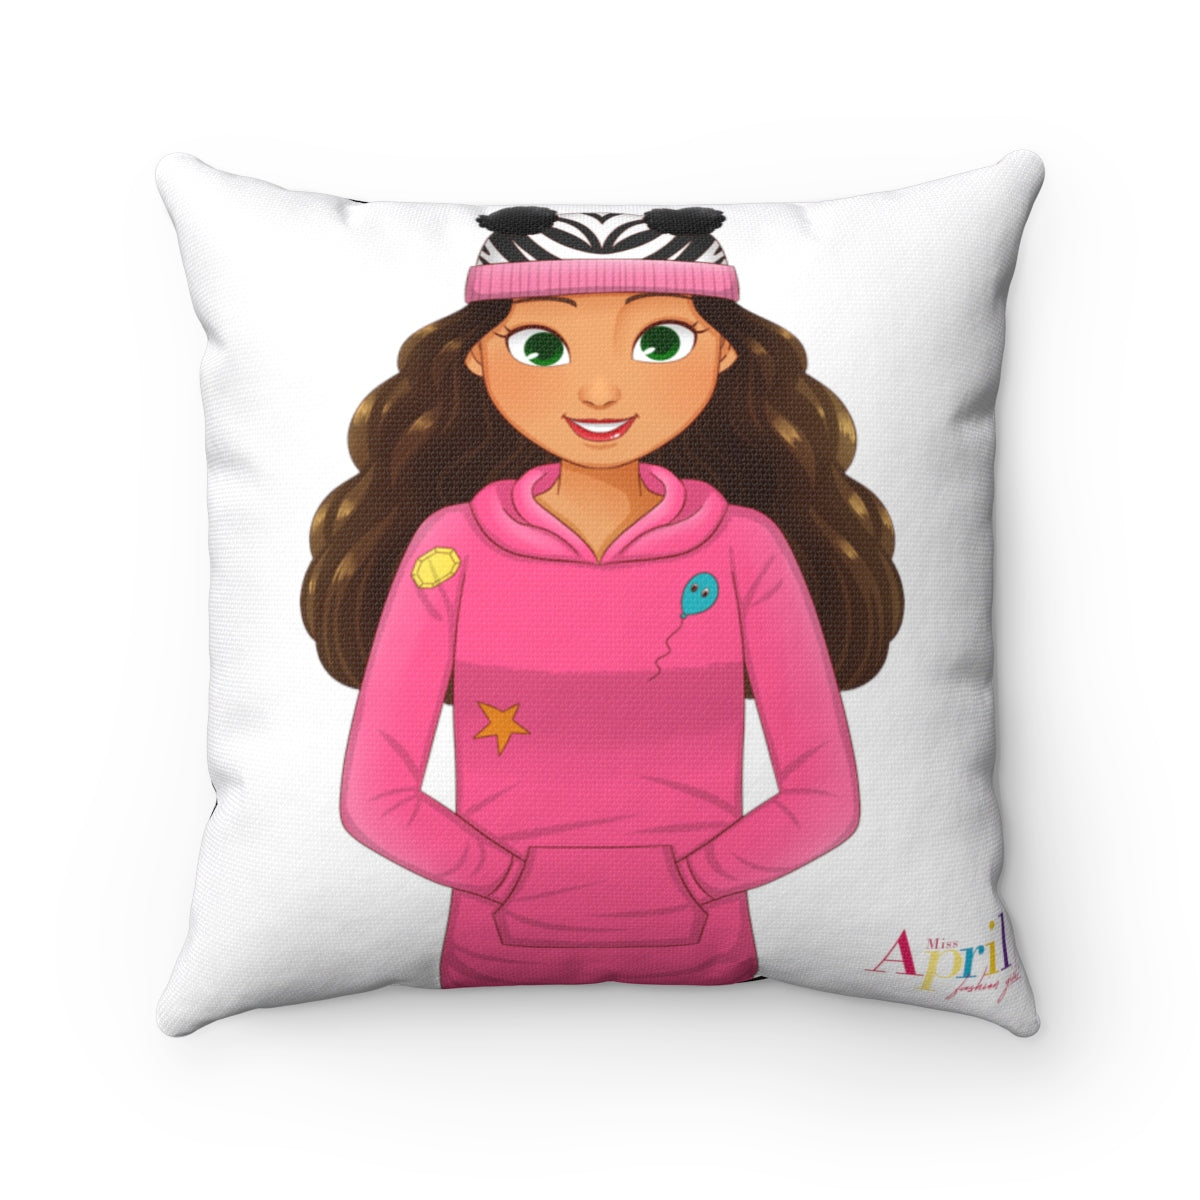 MISS CAMILA SQUARE PILLOW CASE